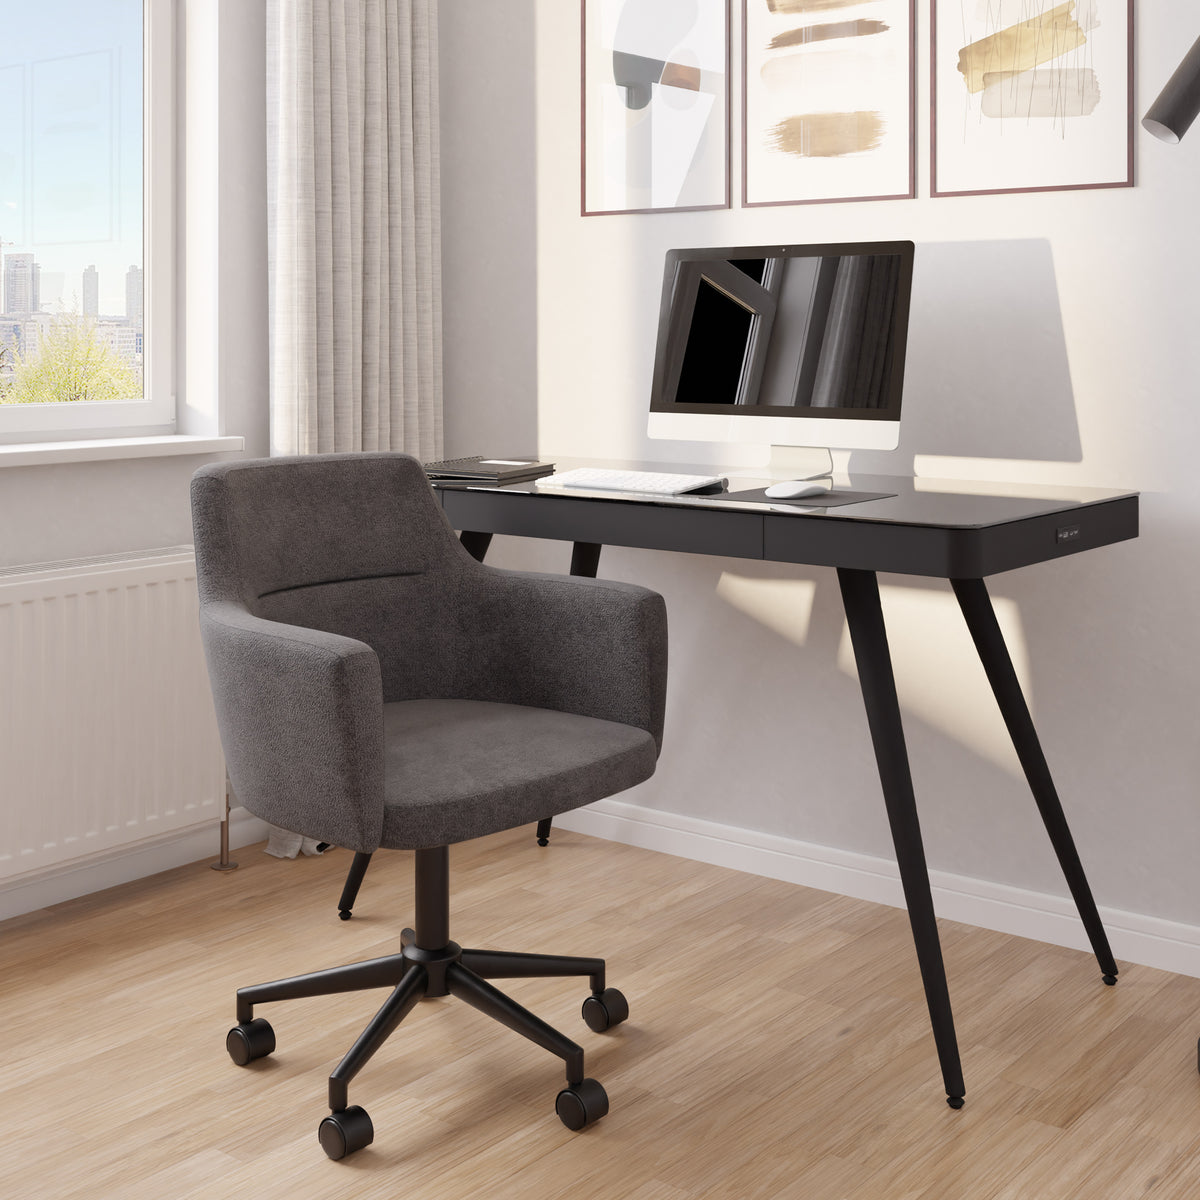 Elsa Height Adjustable Swivel Office Chair for office